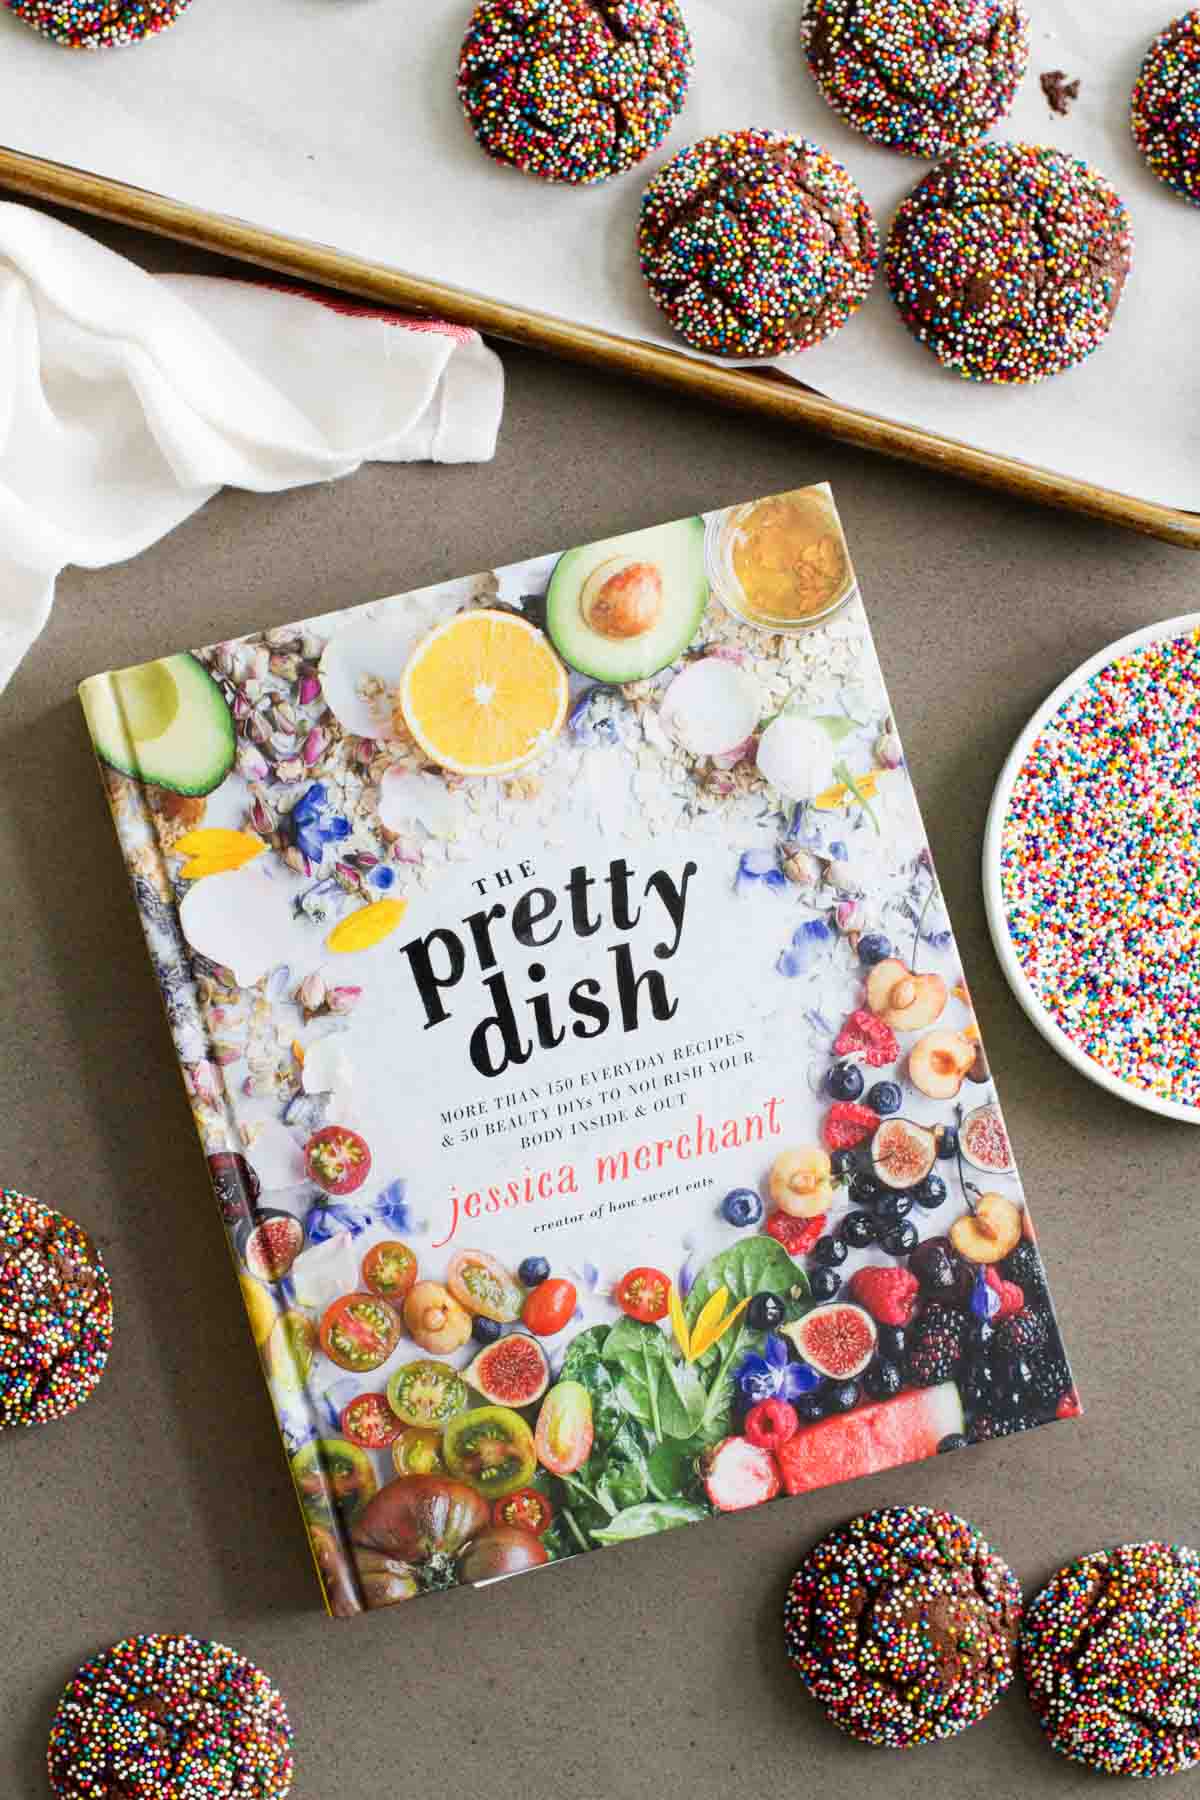 The Pretty Dish cookbook with chocolate crinkle sprinkle cookies and extra sprinkles